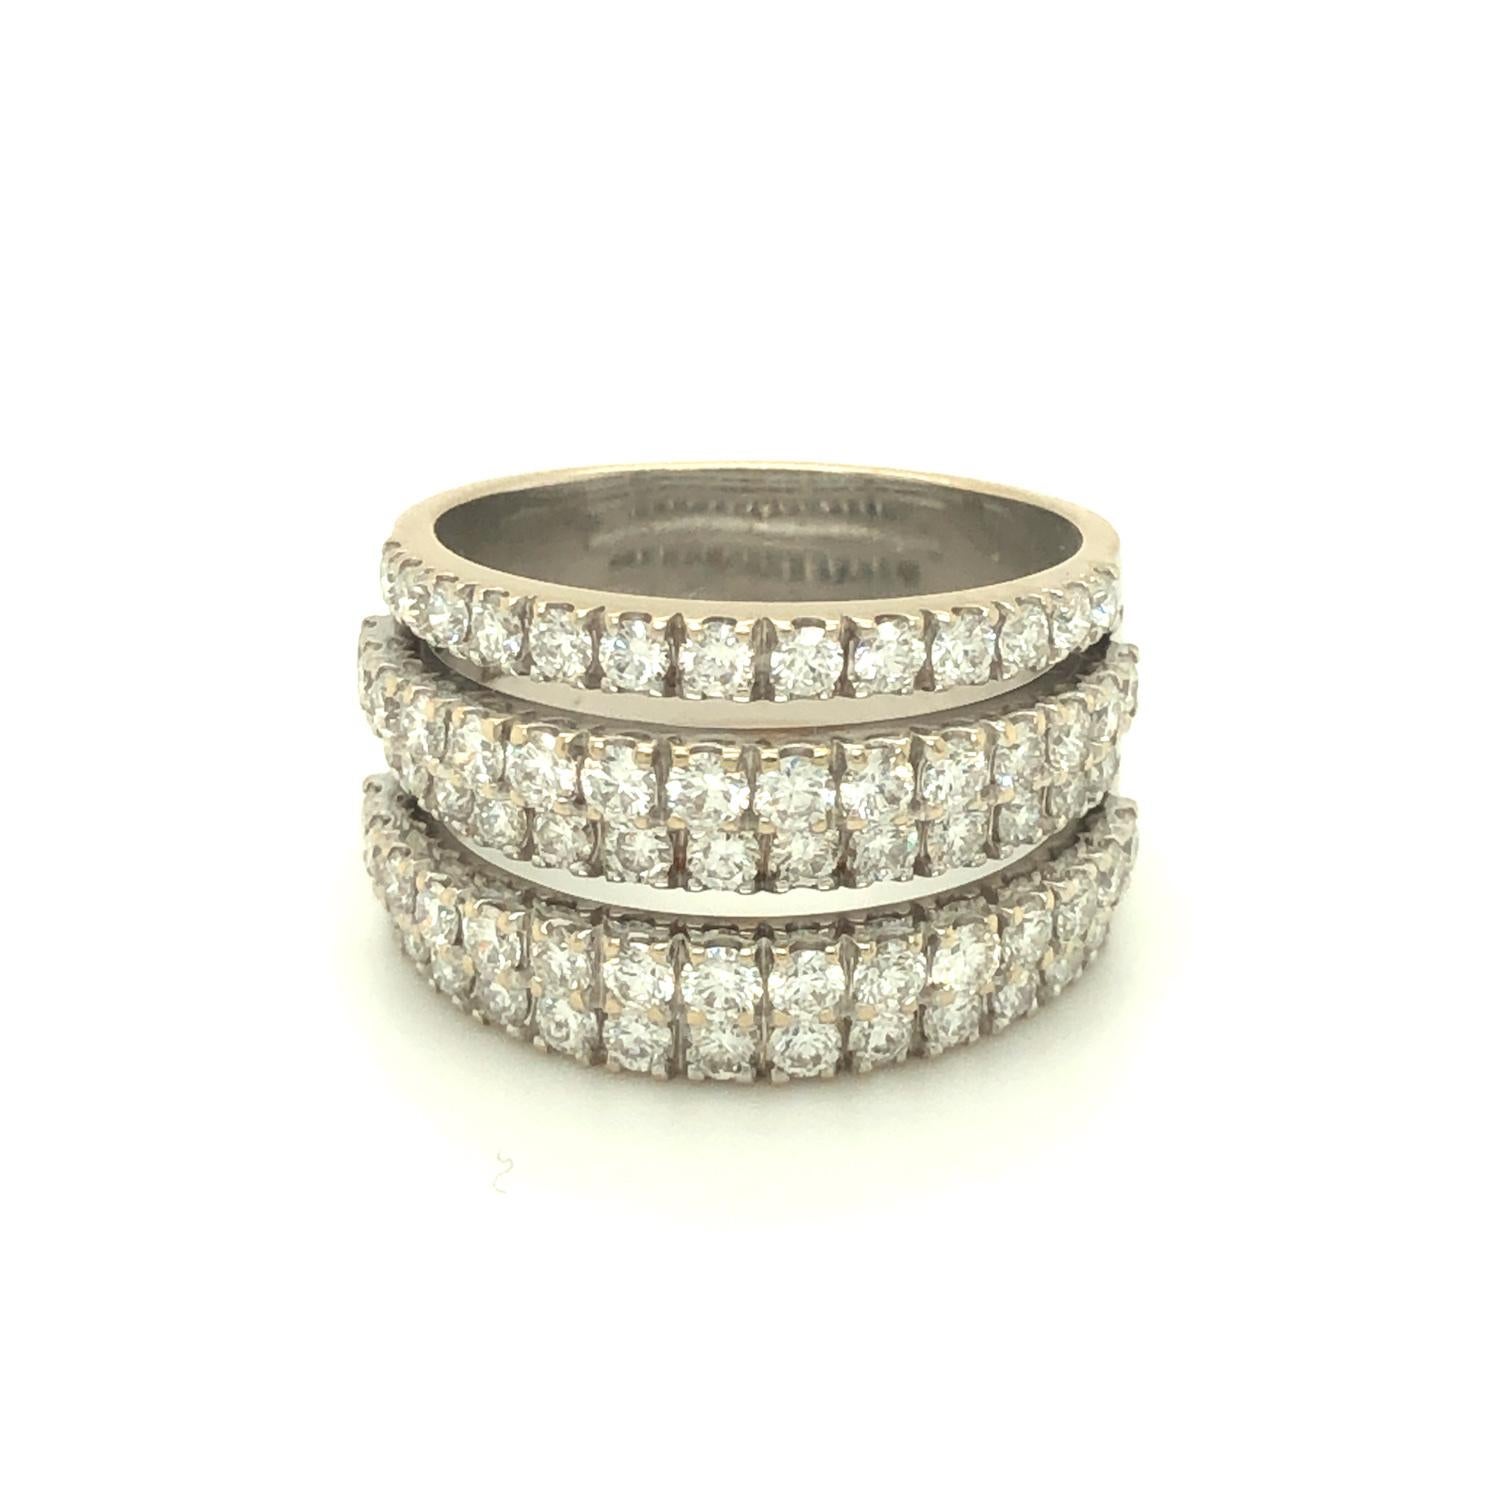 De Beers modern and elegant diamond ring with five stacking pavé-set round brilliant diamond bands. The band is 13 mm wide. The total weight of diamond is approximately 1.75 carats. Size 7.